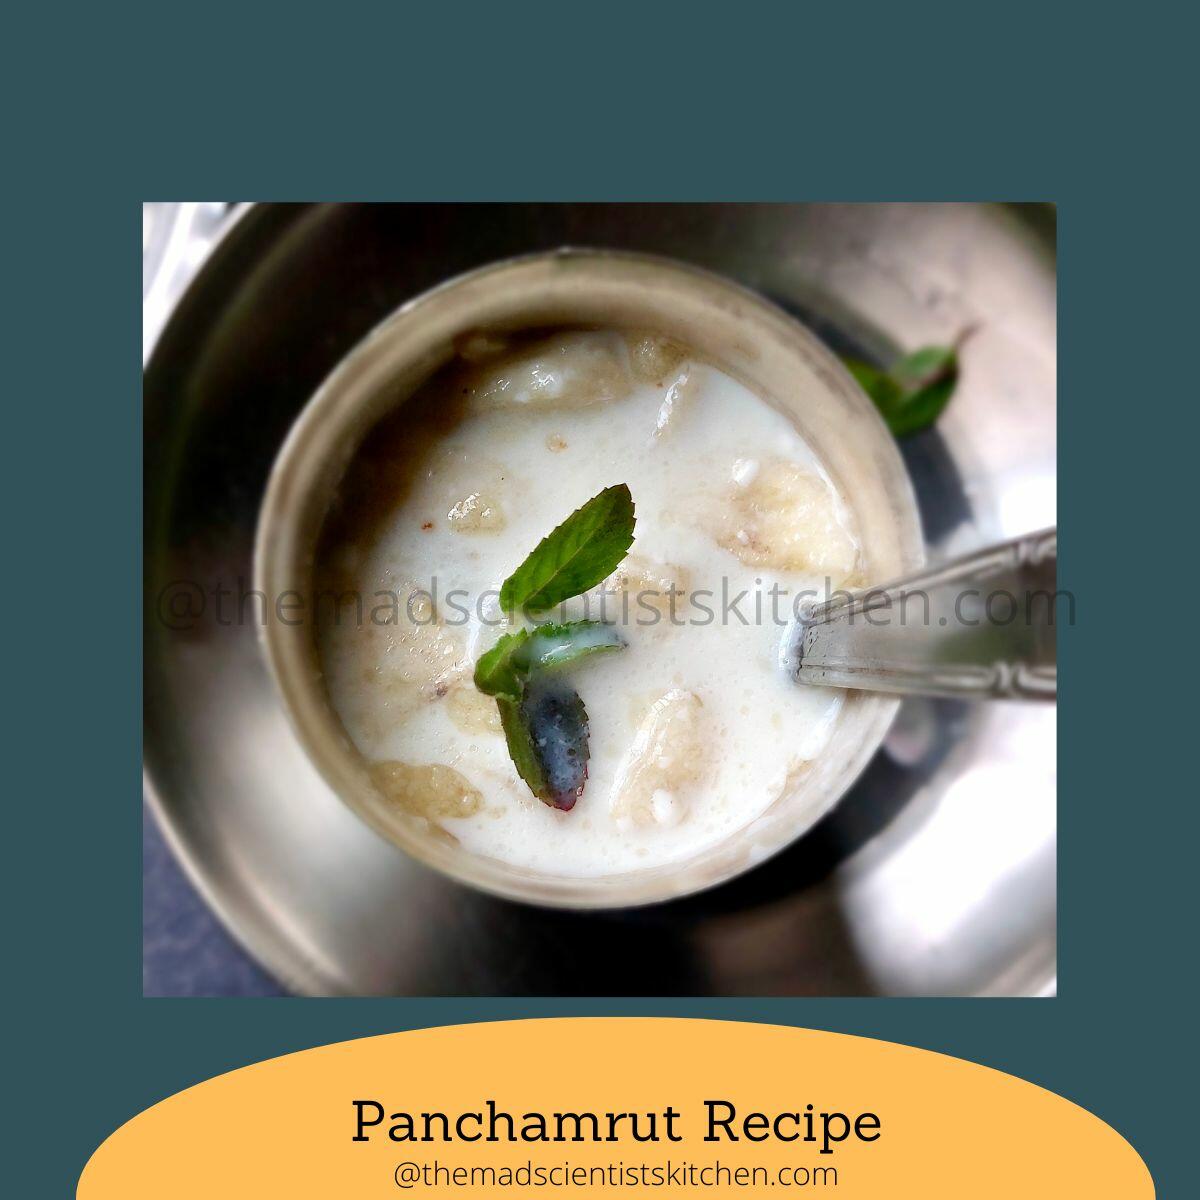 Panchamrut, an offering to the Gods